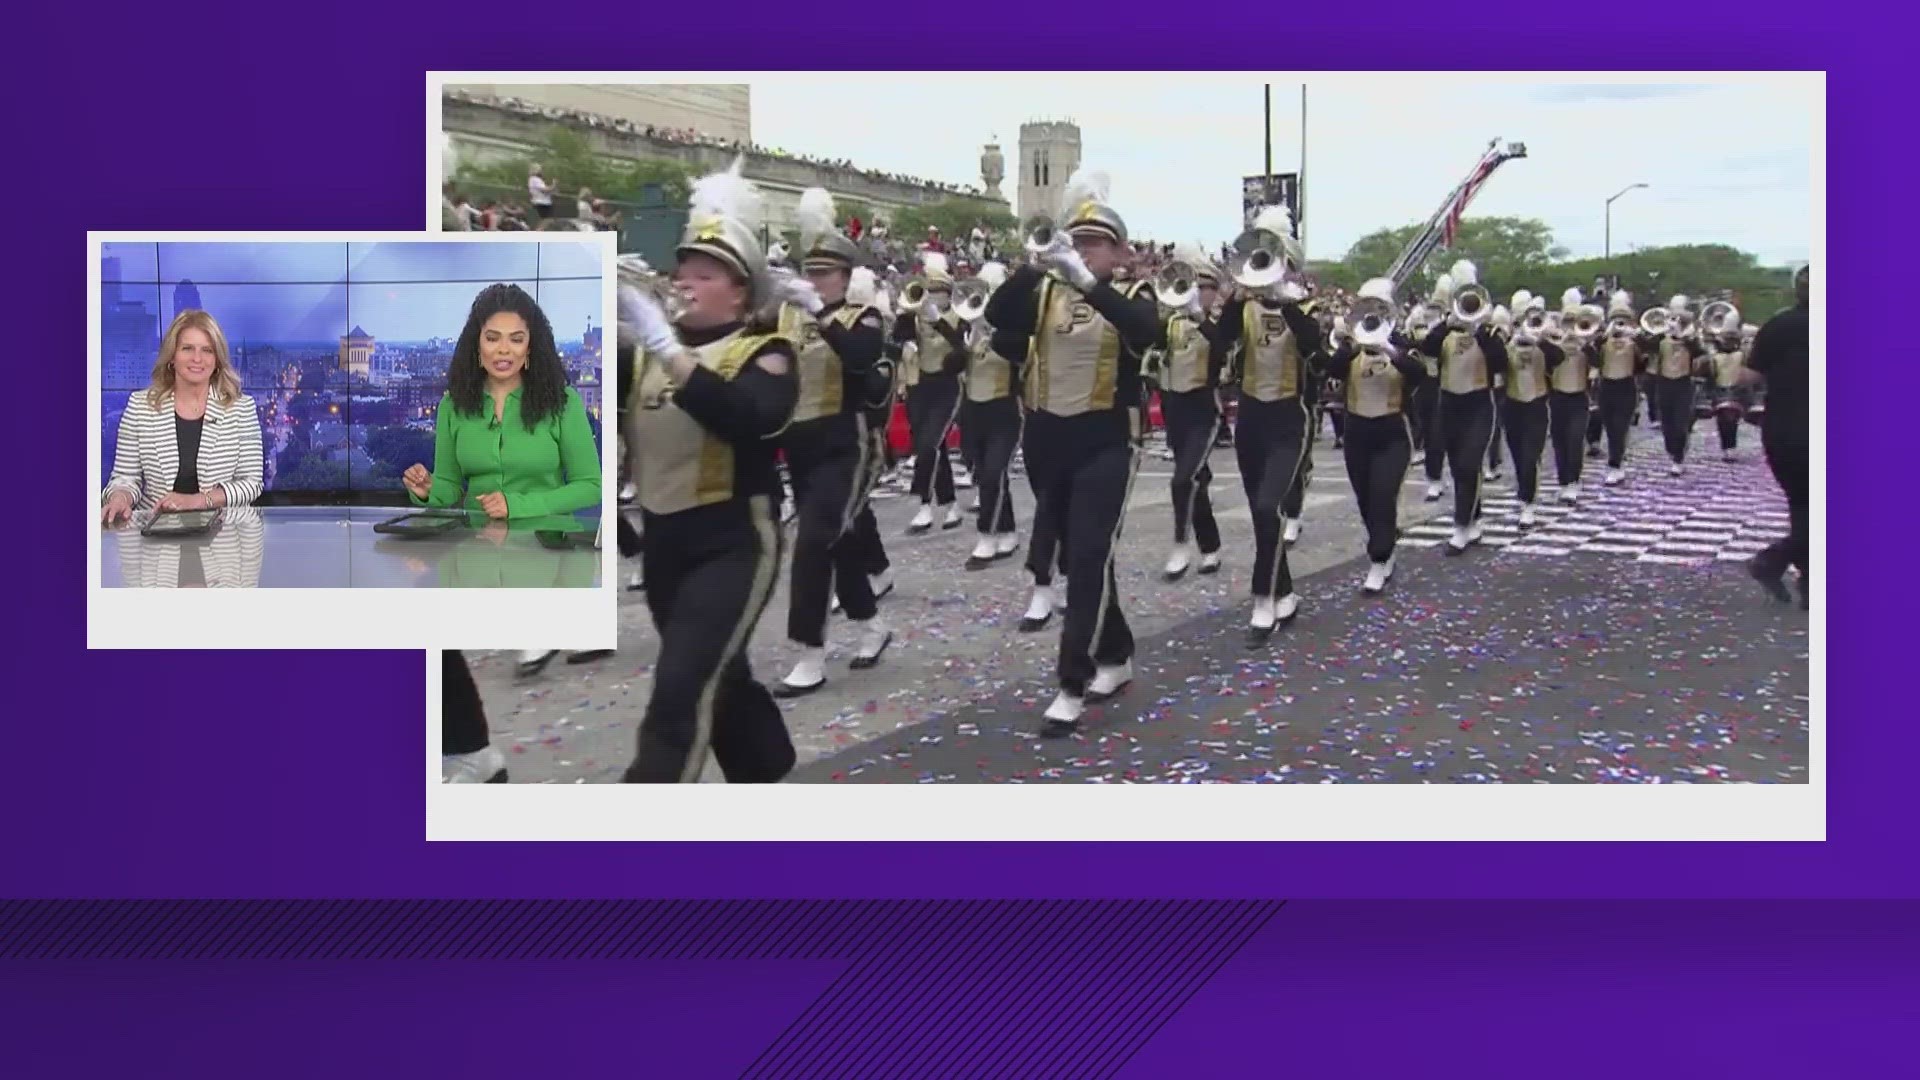 We've learned which 9 marching bands will perform in this years AES 500 Festival Parade.